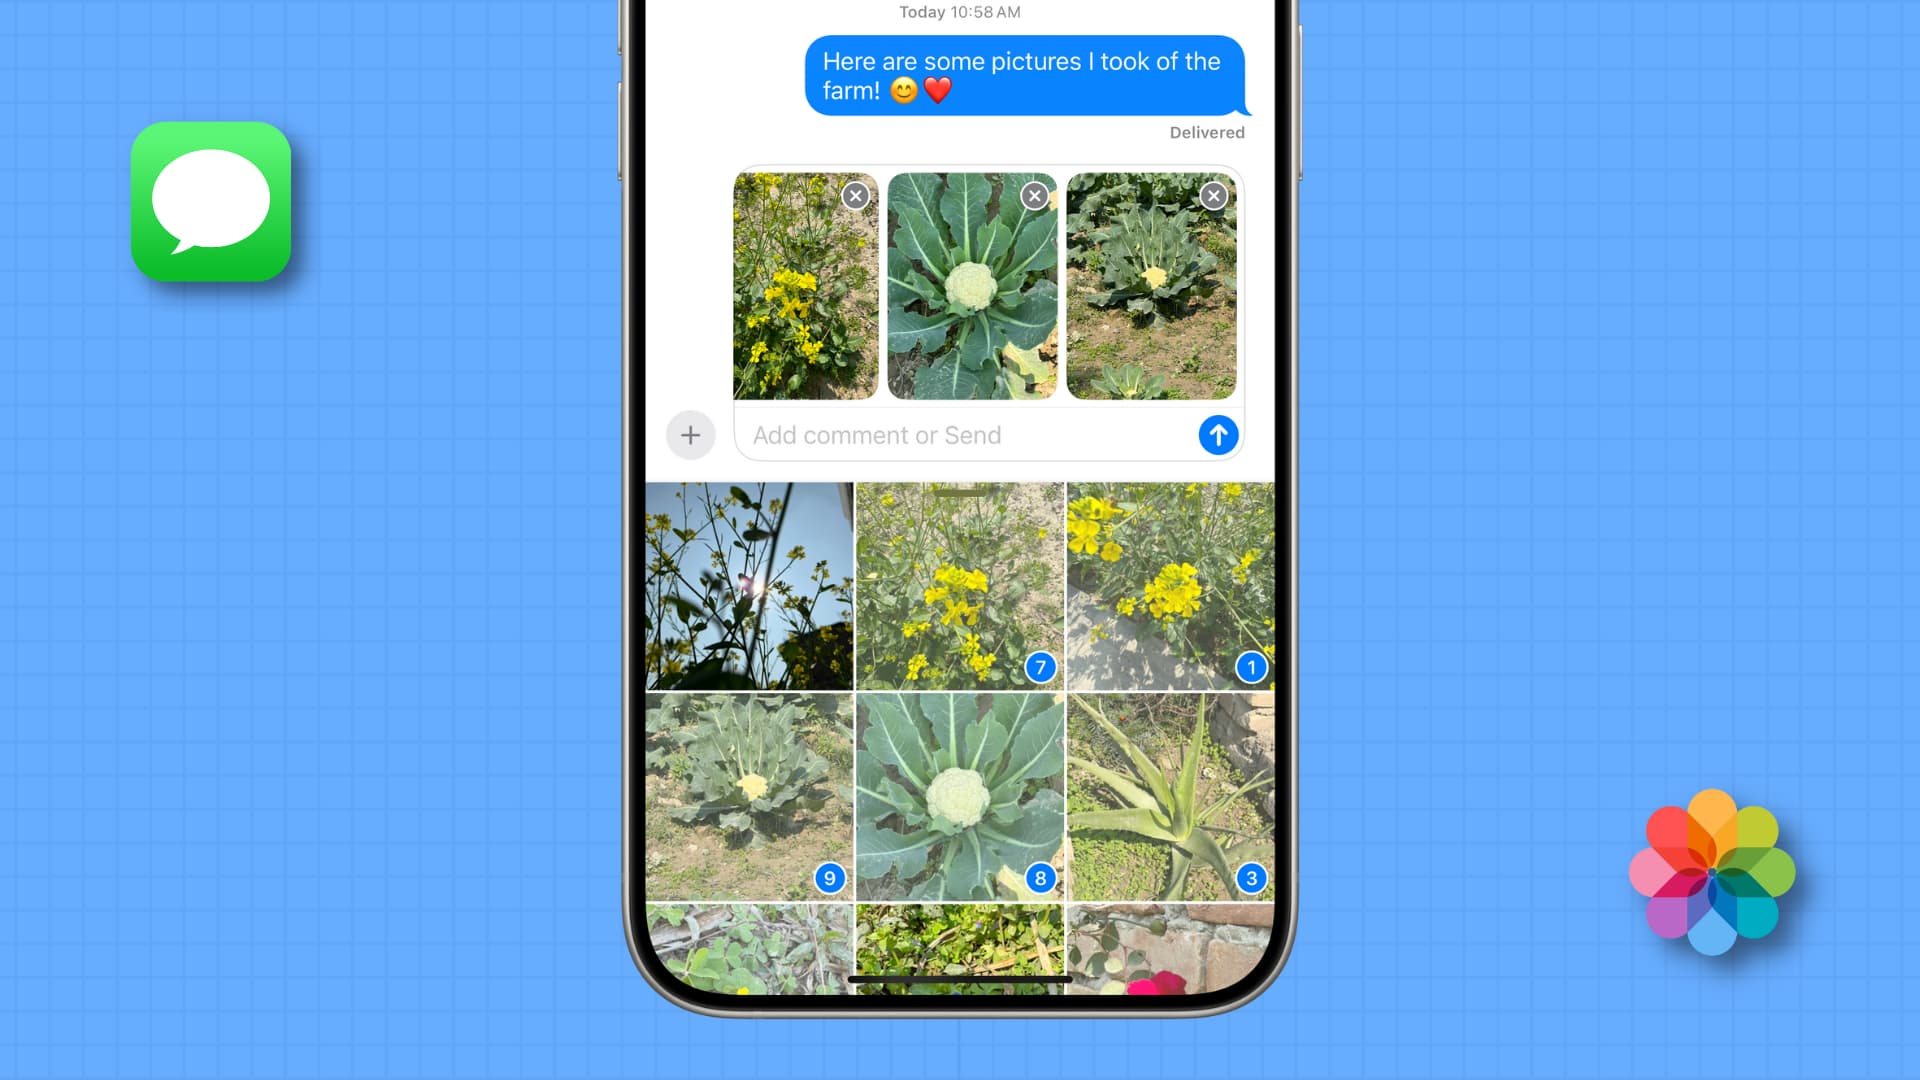 Sending photos using the Messages app on iPhone